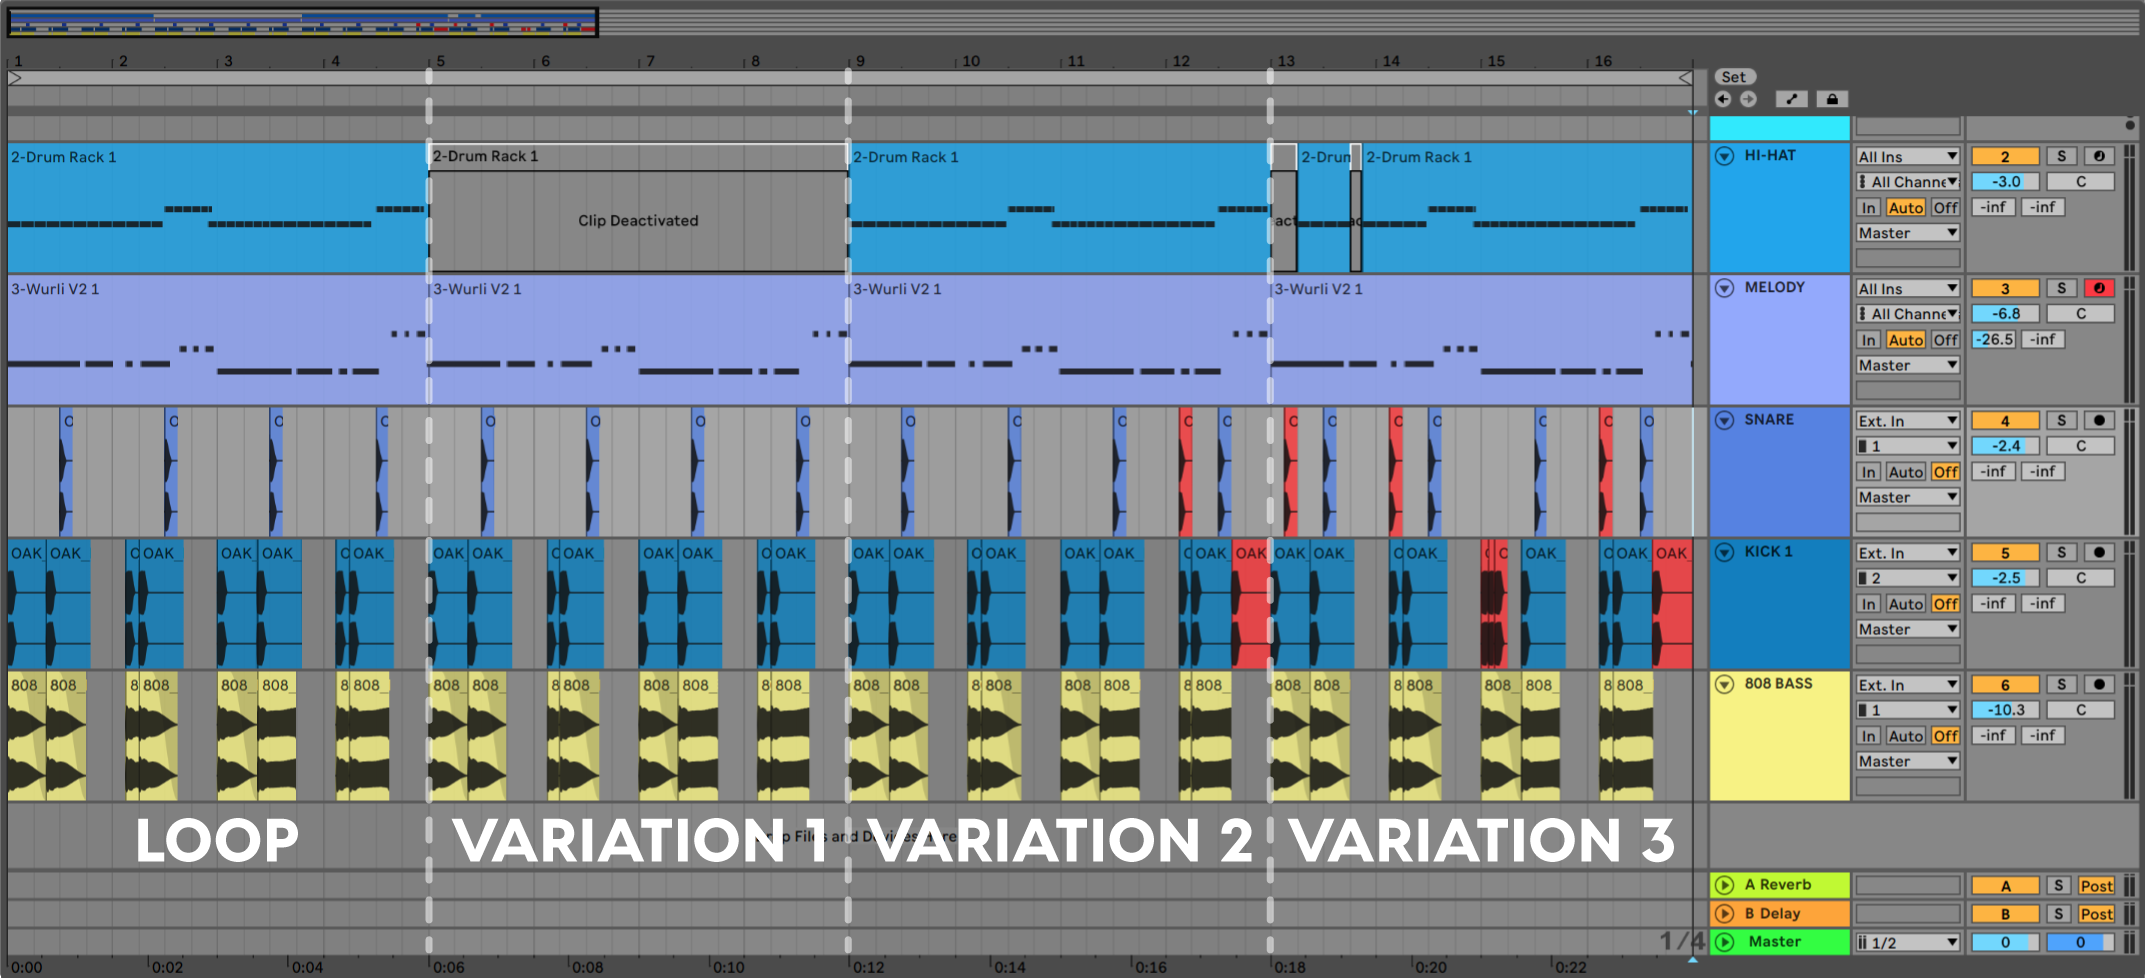 Theme and Variation graphic in Ableton screenshot